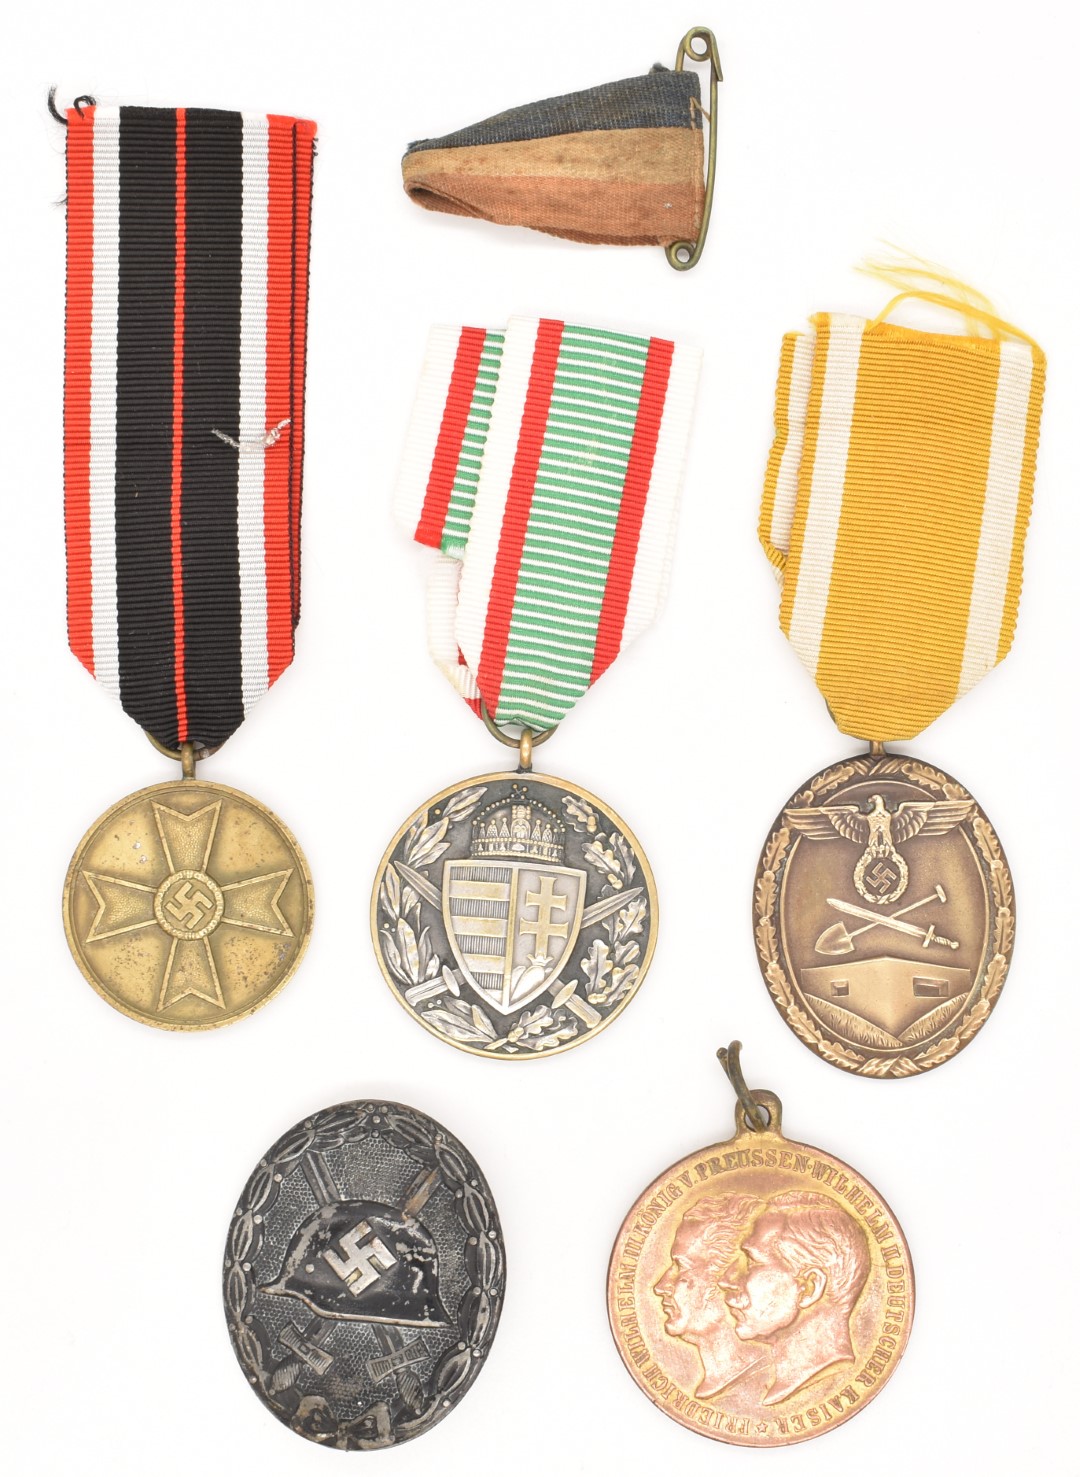 German WW2 Nazi Third Reich War Merit Cross Medal, Atlantic Wall Medal and a Wound Badge, together